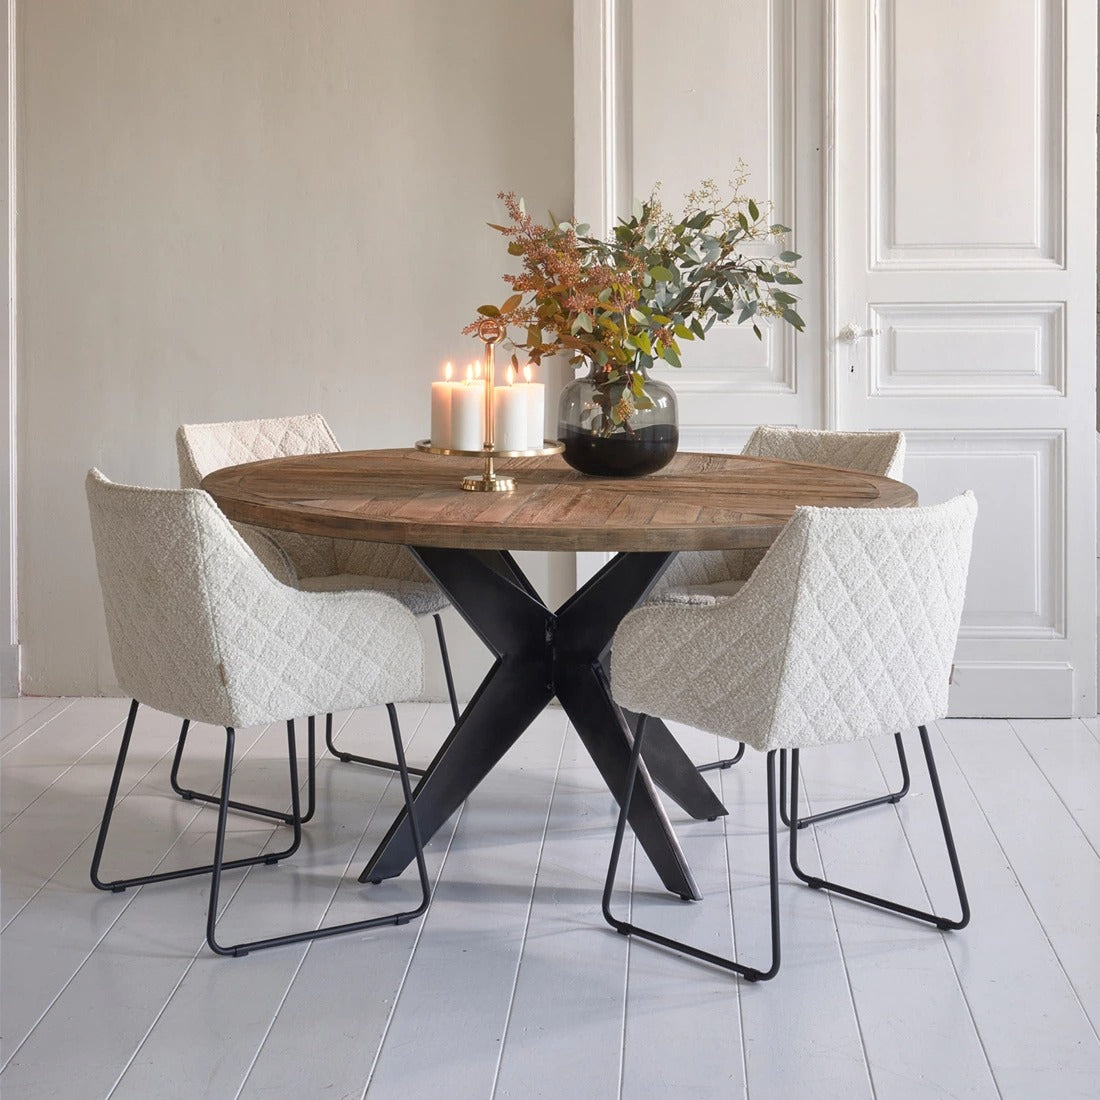 Dining table chair FRISCO DRIVE - White Sand